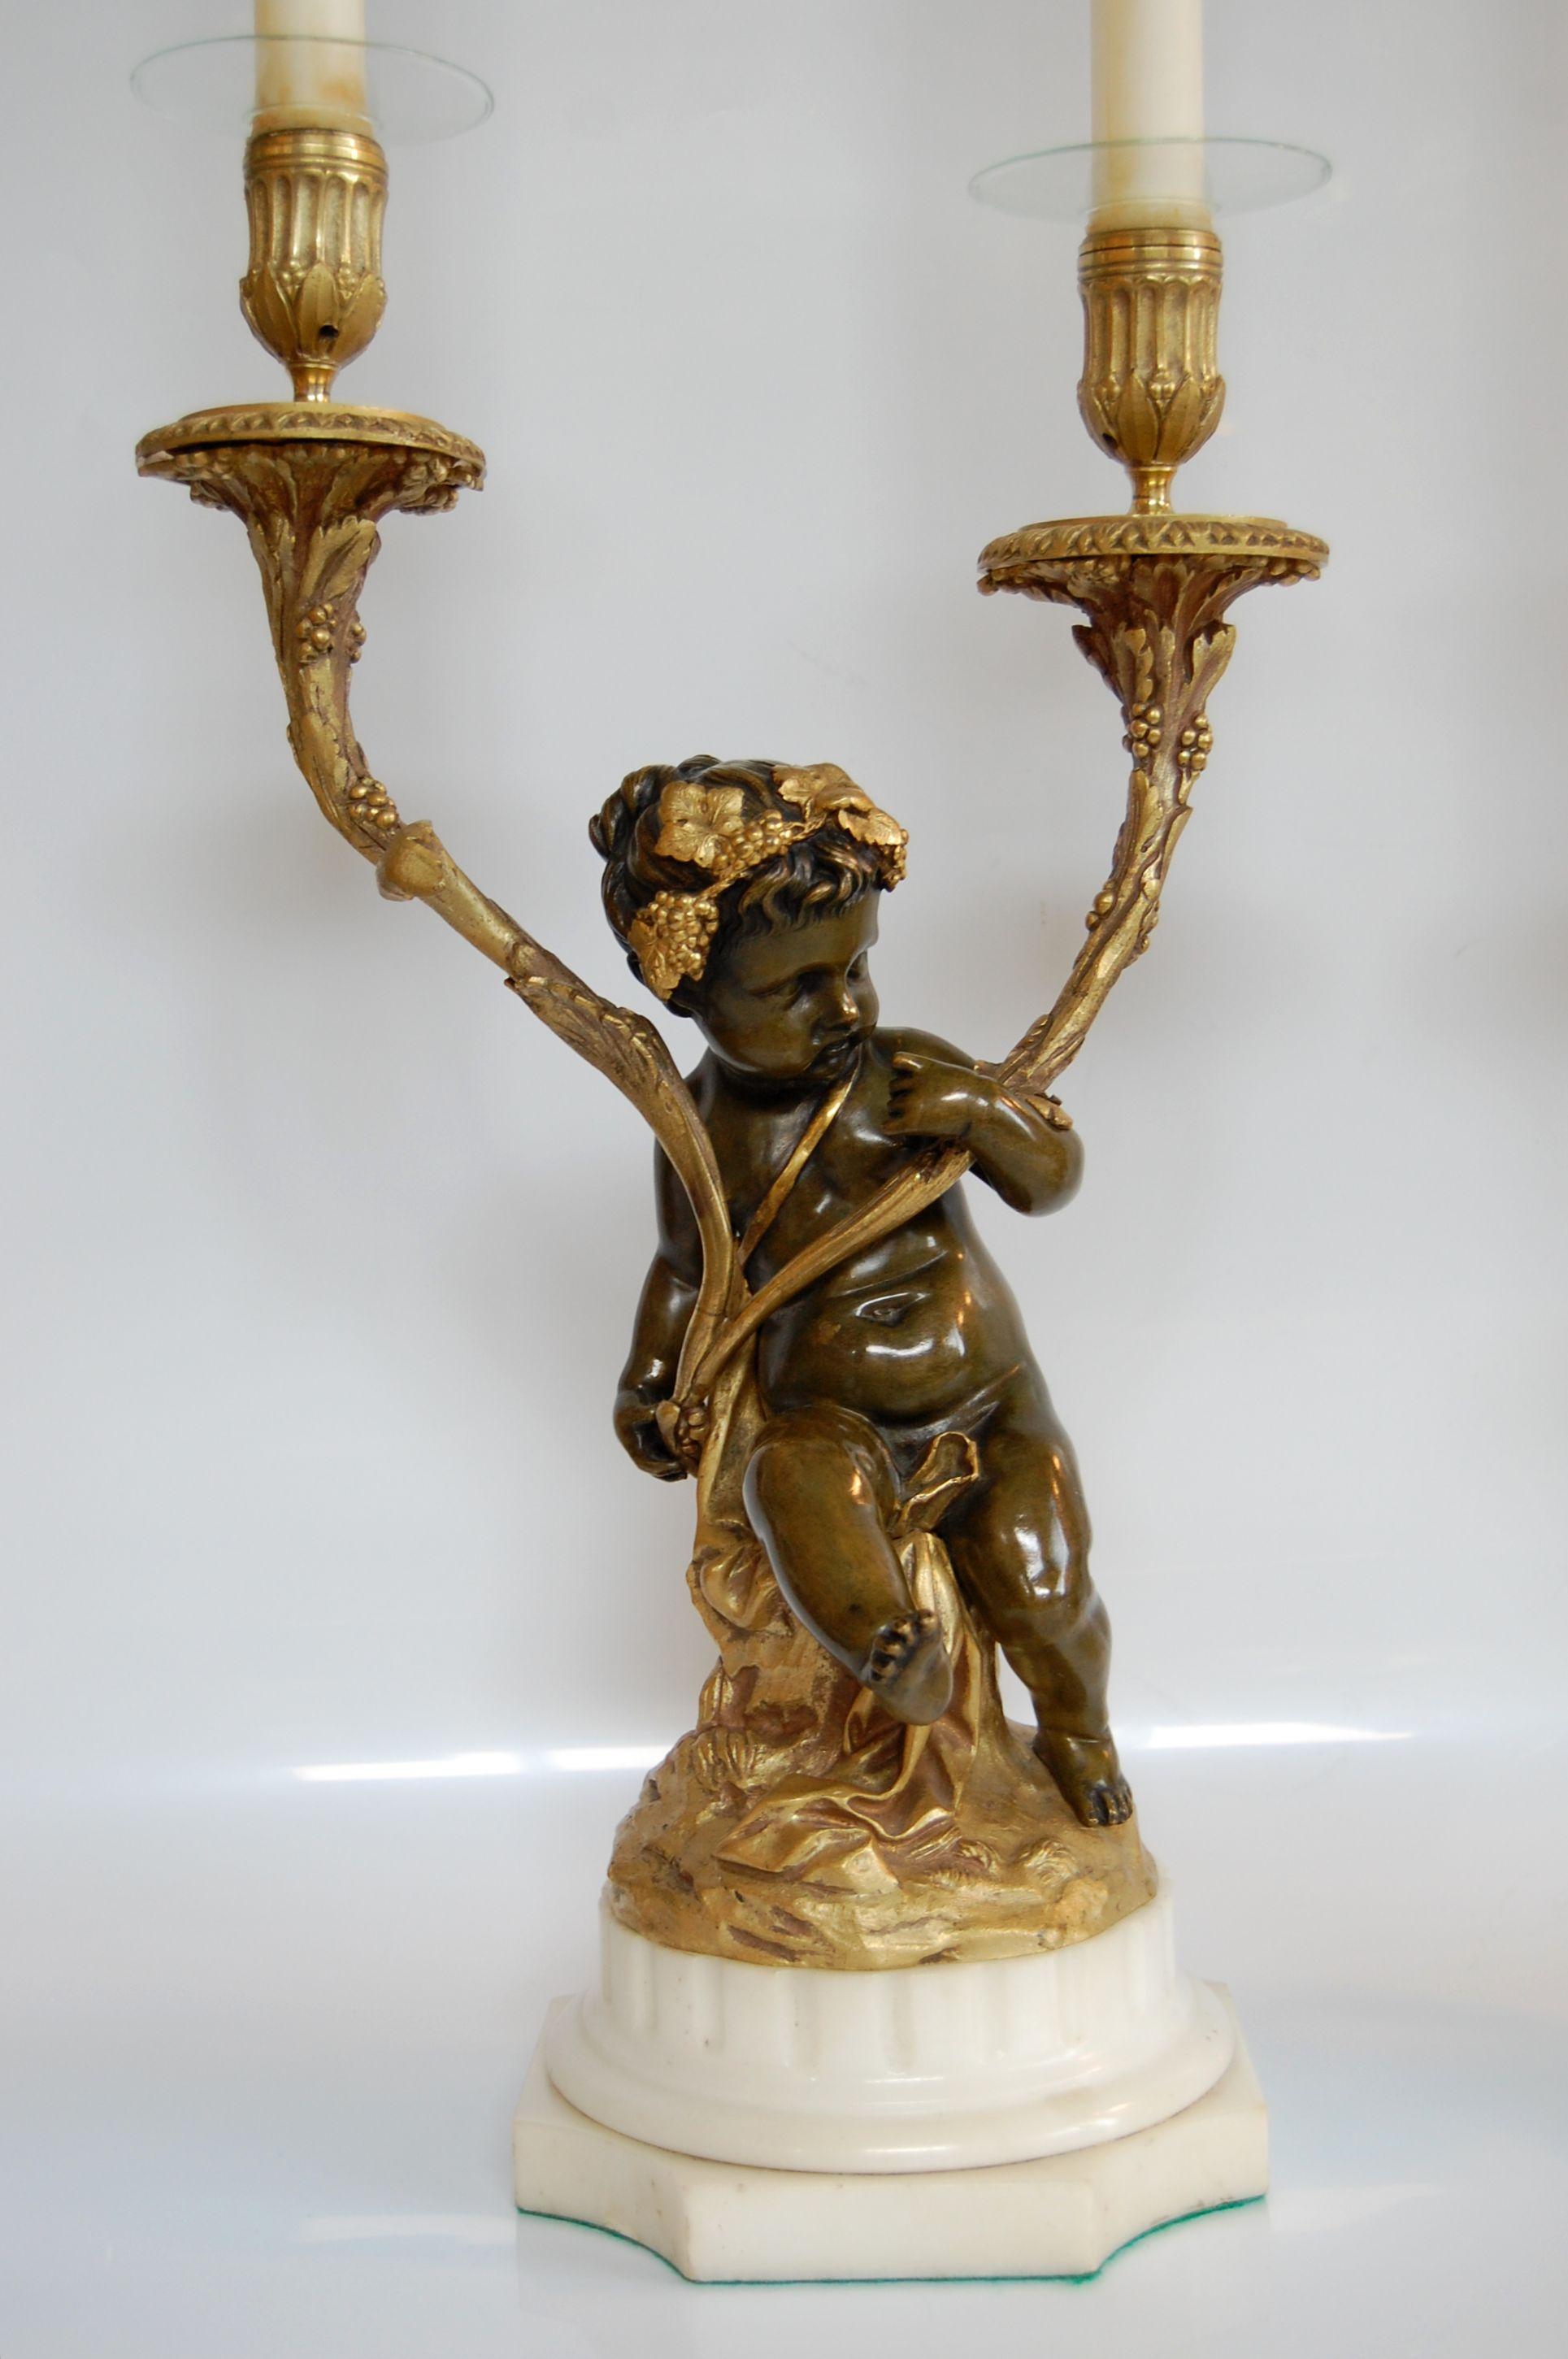 This pair of gilt and patinated candelabra are in excellent condition and make quite a statement. The finish on both the metal and marble are in excellent condition. Originally wired, it has since been removed for candle burning, but can be